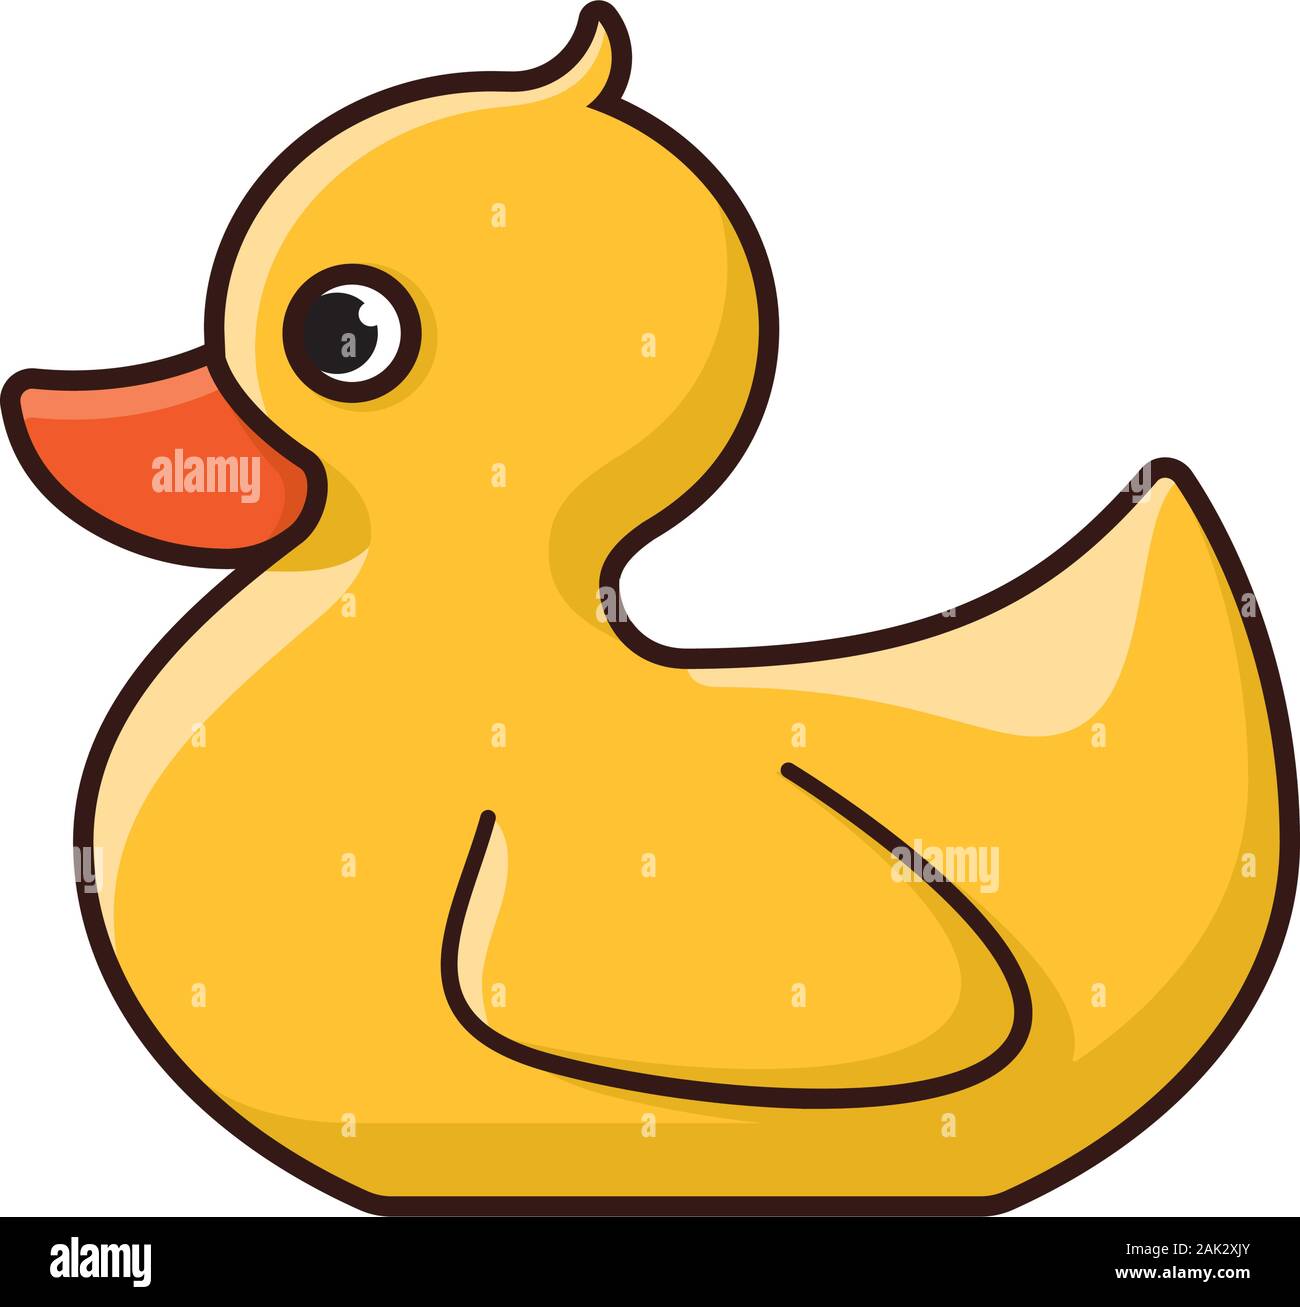 Yellow bath toy duck illustration for Rubber Duckie Day on January 13. Baby toy isolated color vector symbol Stock Vector